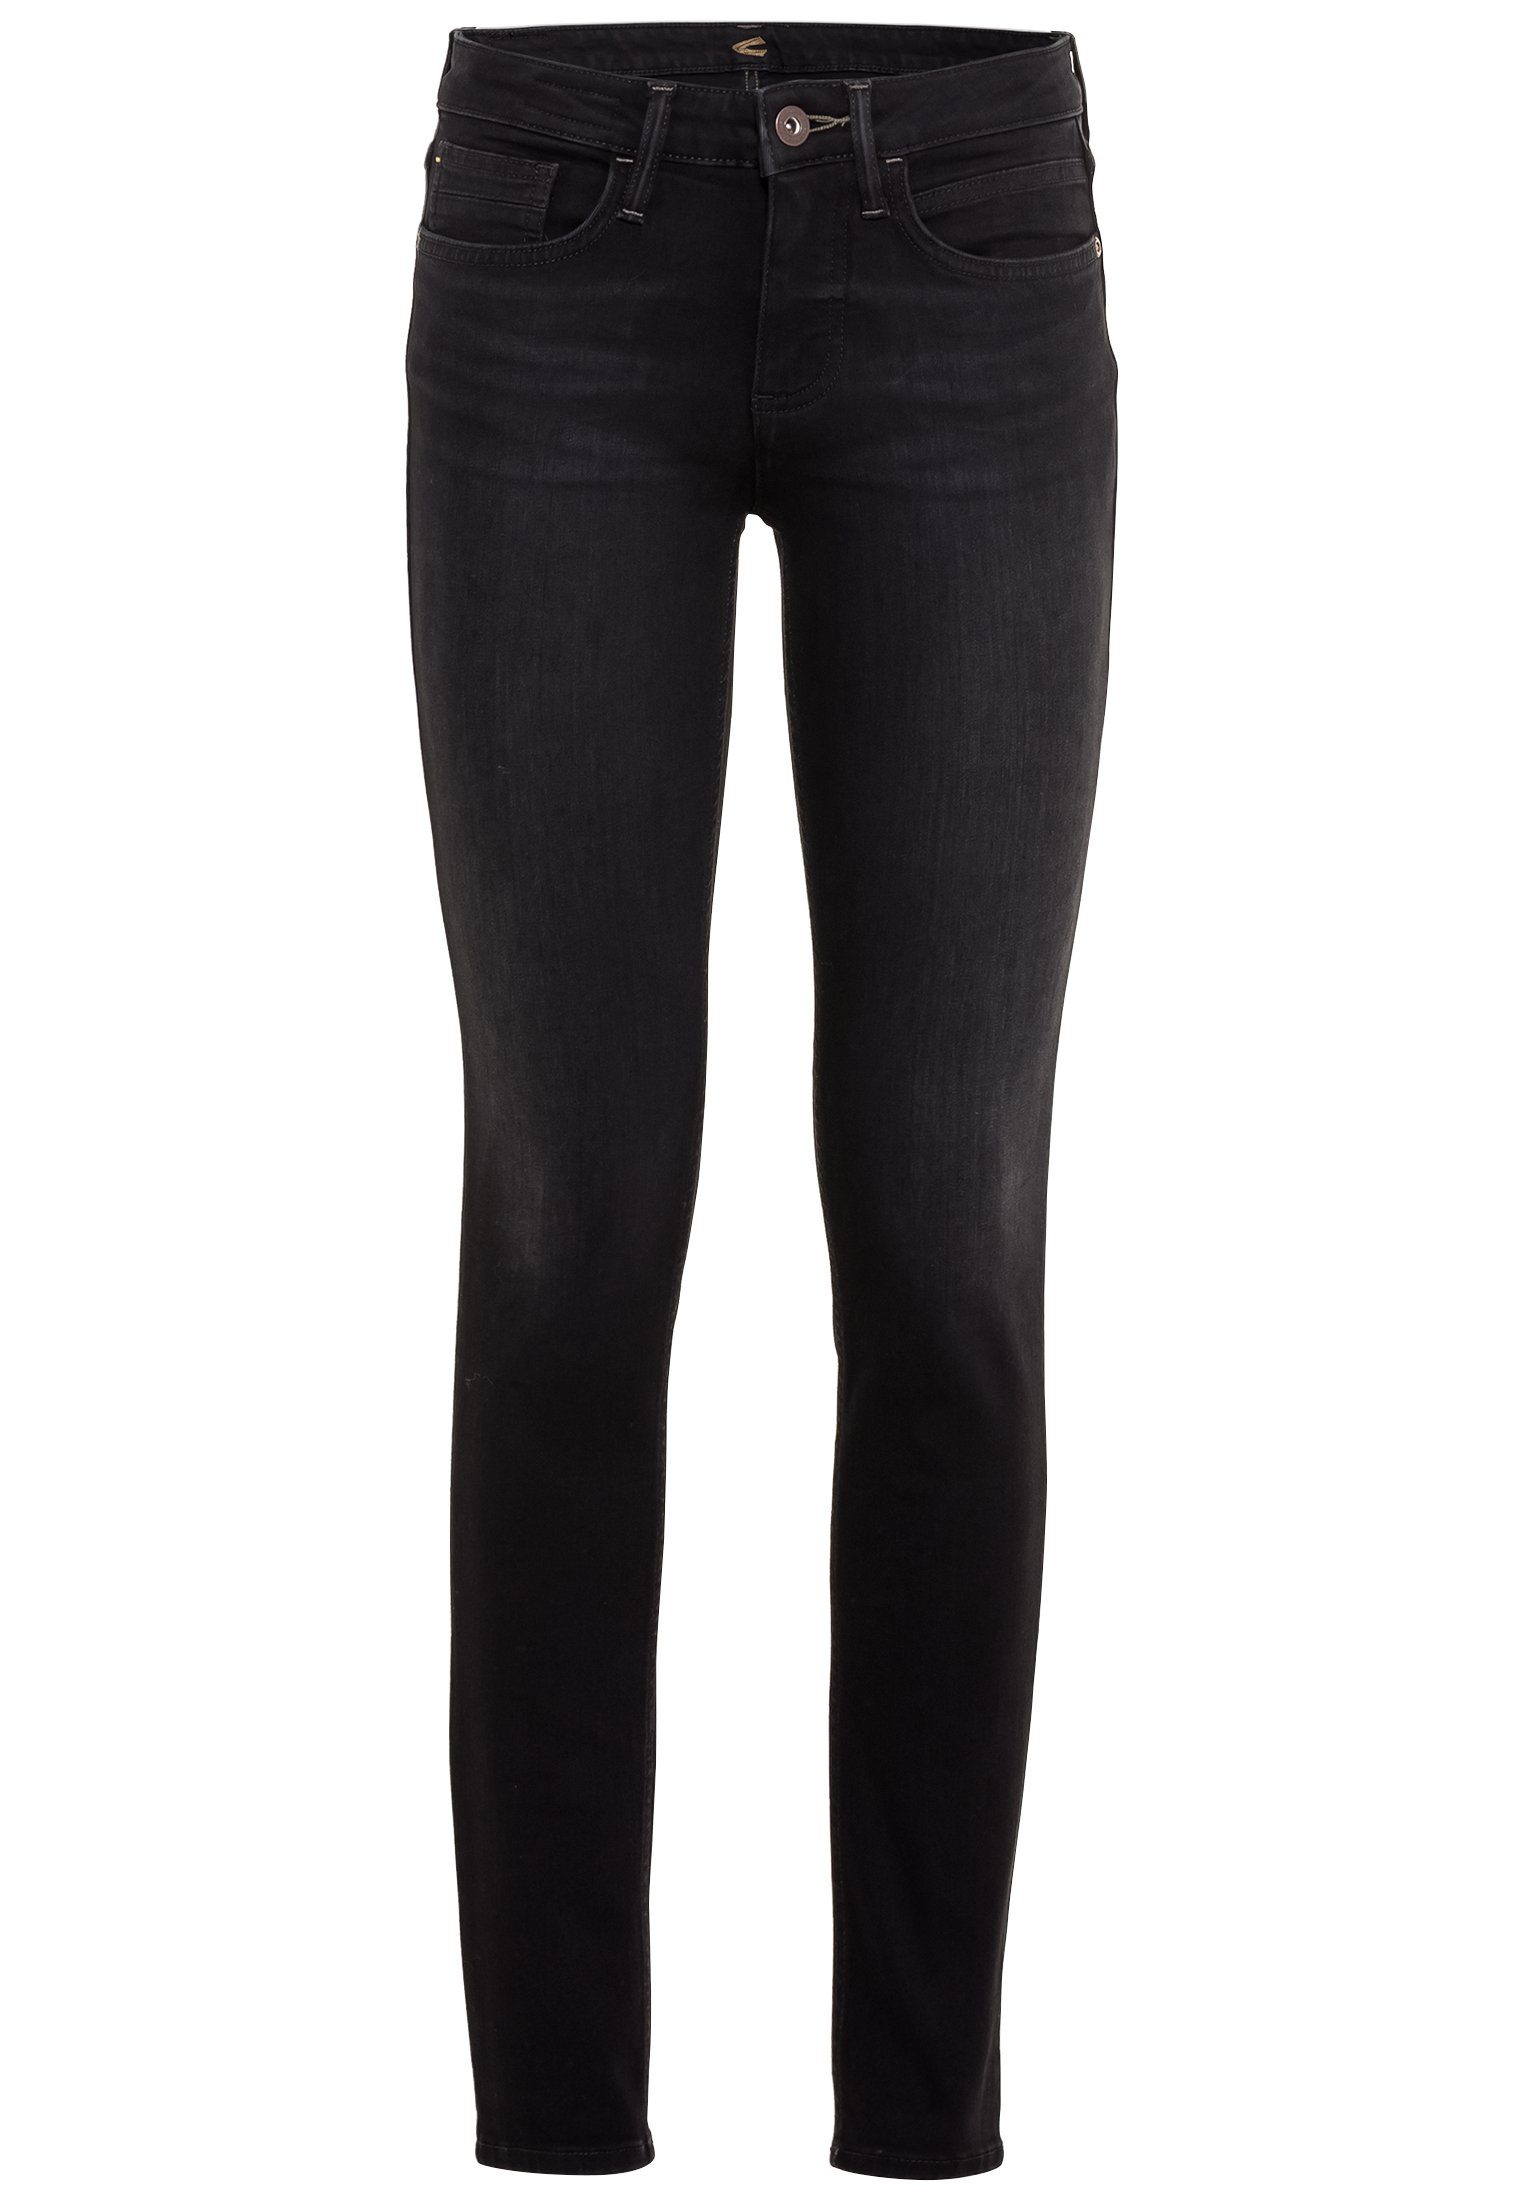 camel active Straight-Jeans Camel Active Damen Jeans Skinny Black | Straight-Fit Jeans